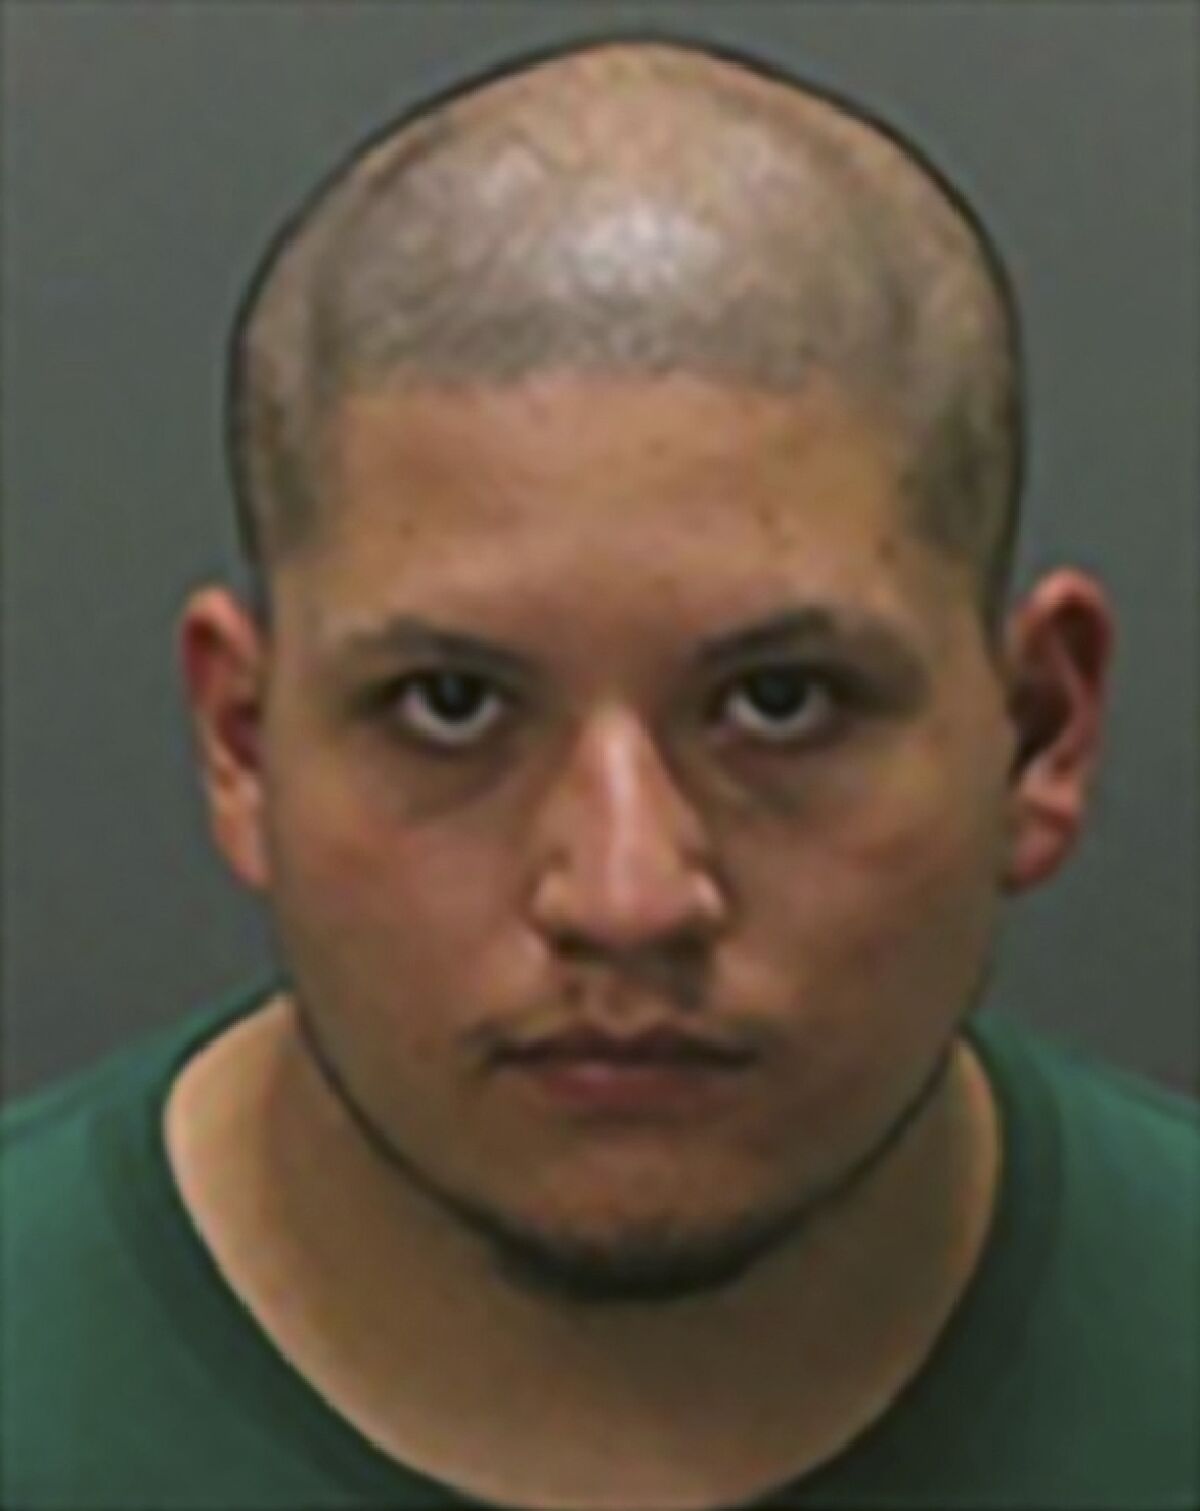 This booking photo released by the Corona, Calif., Police Department shows 20-year-old Joseph Jimenez, who was arrested Tuesday, July 27, 2021, in connection with a shooting that killed an 18-year-old woman and seriously wounded a 19-year-old social media influencer as they watched “The Forever Purge” at a Southern California movie theater. He is being held on $2 million bail. (Corona Police Department via AP)